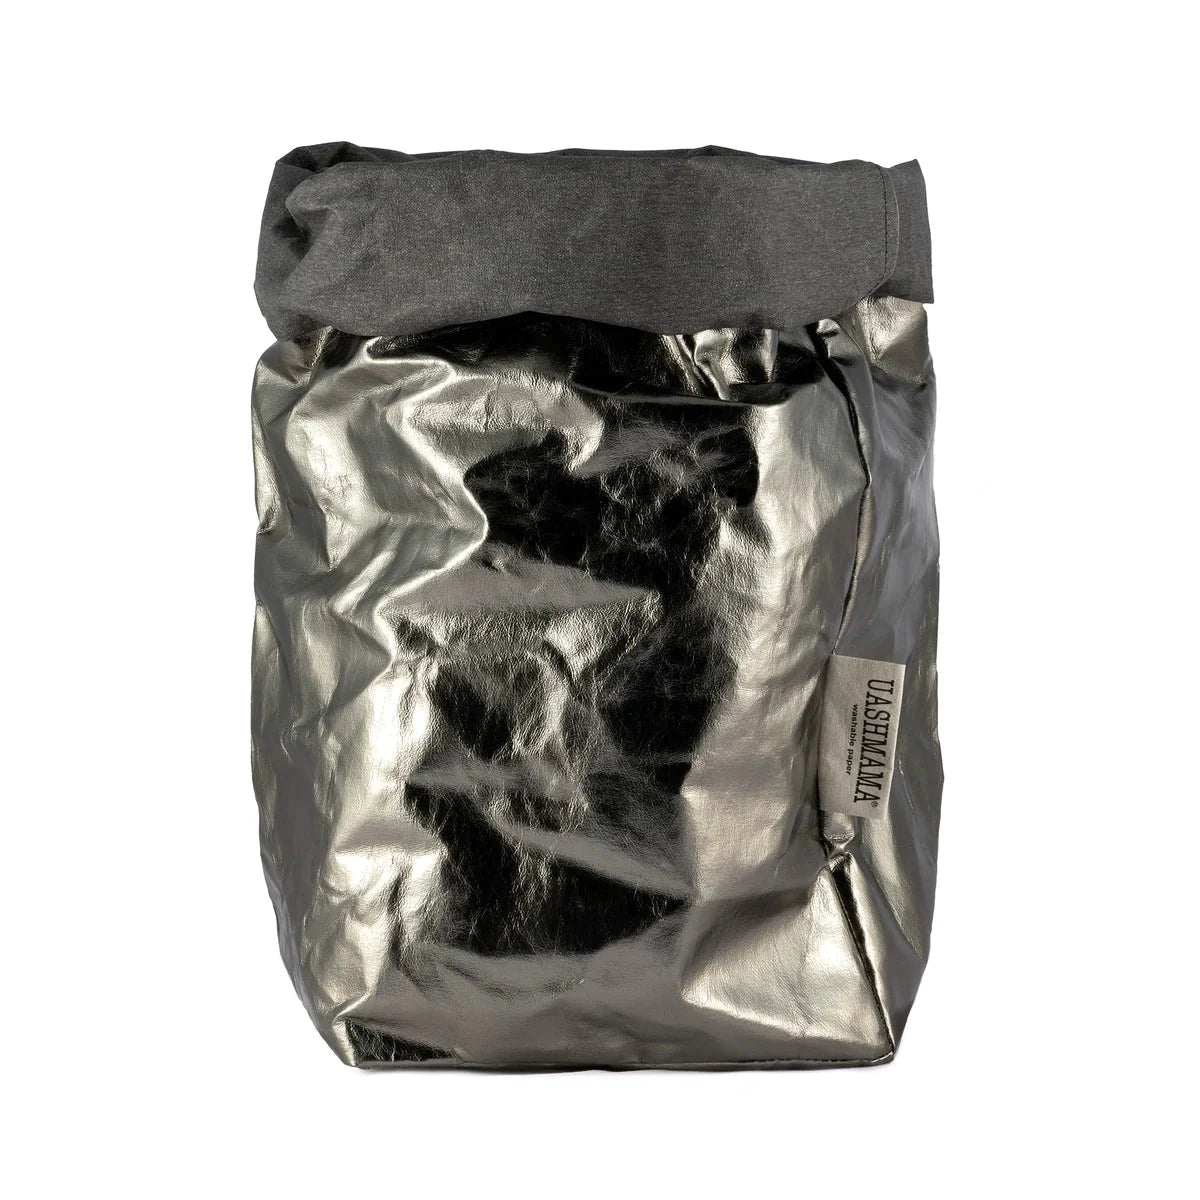 A washable paper bag is shown. The bag is rolled down at the top and features a UASHMAMA logo label on the bottom left corner. The bag pictured is the extra large size in metallic dark grey.